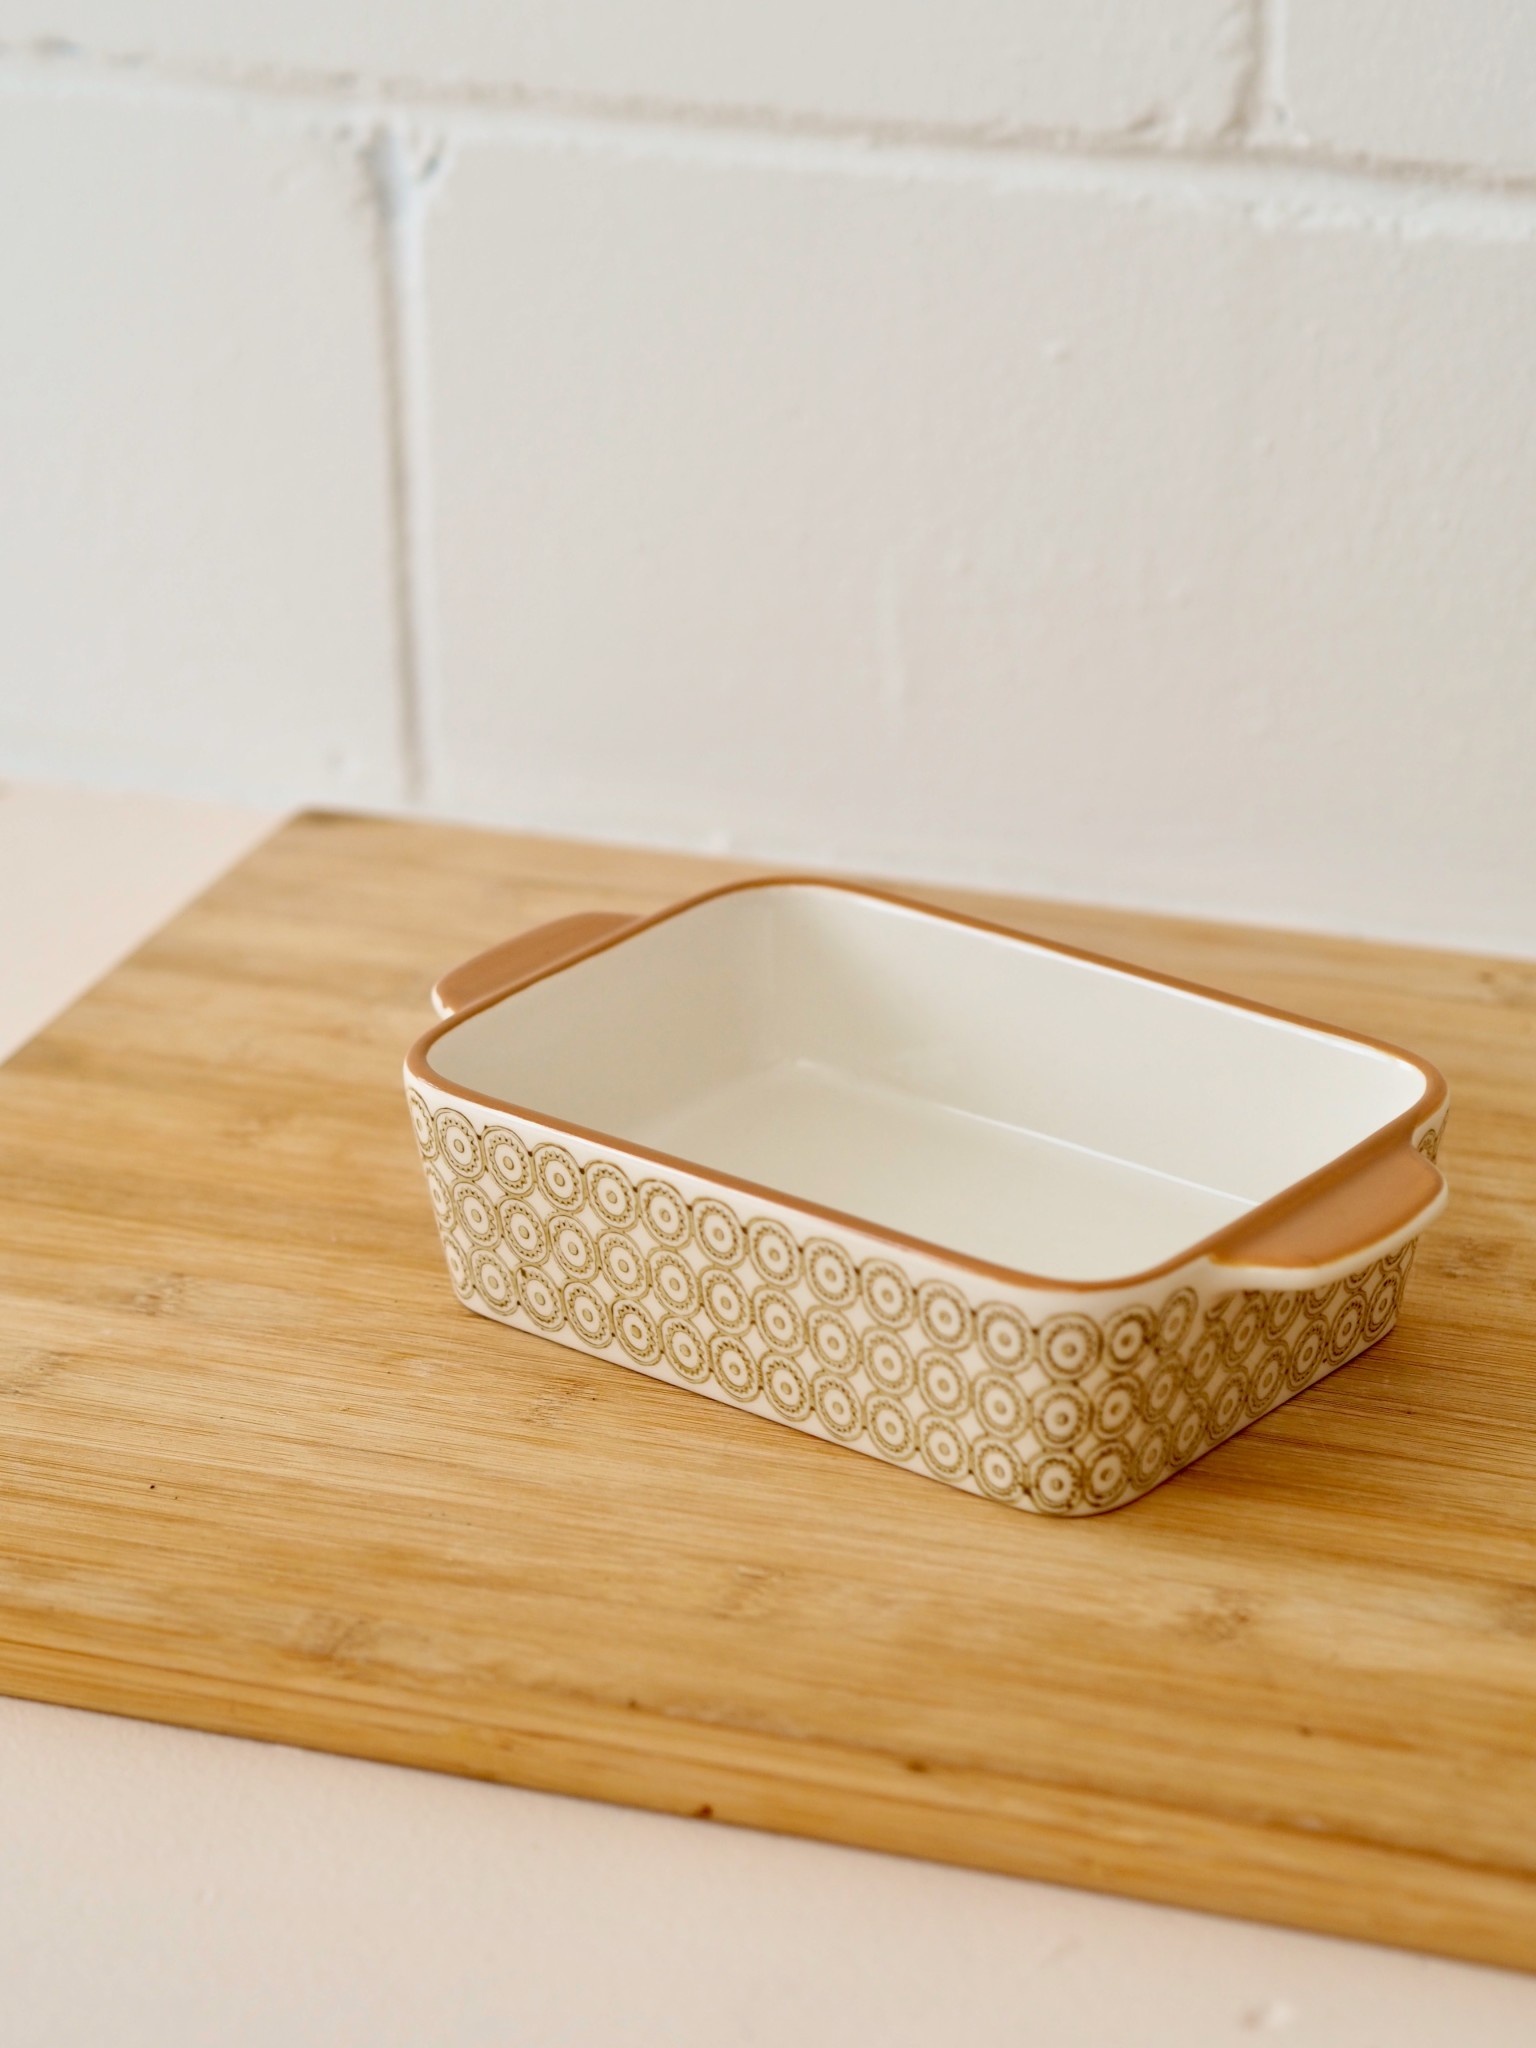 Small patterned oven dish